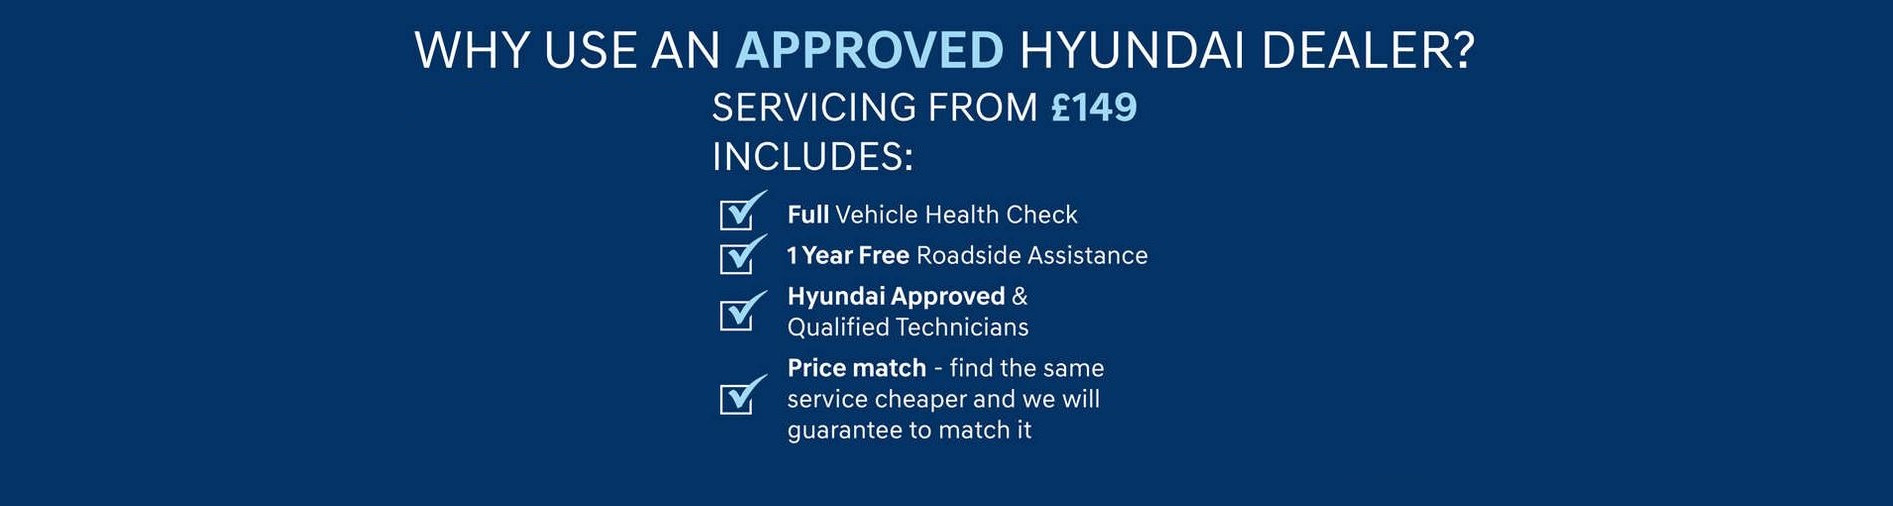 Why use an approved Hyundai Dealer?